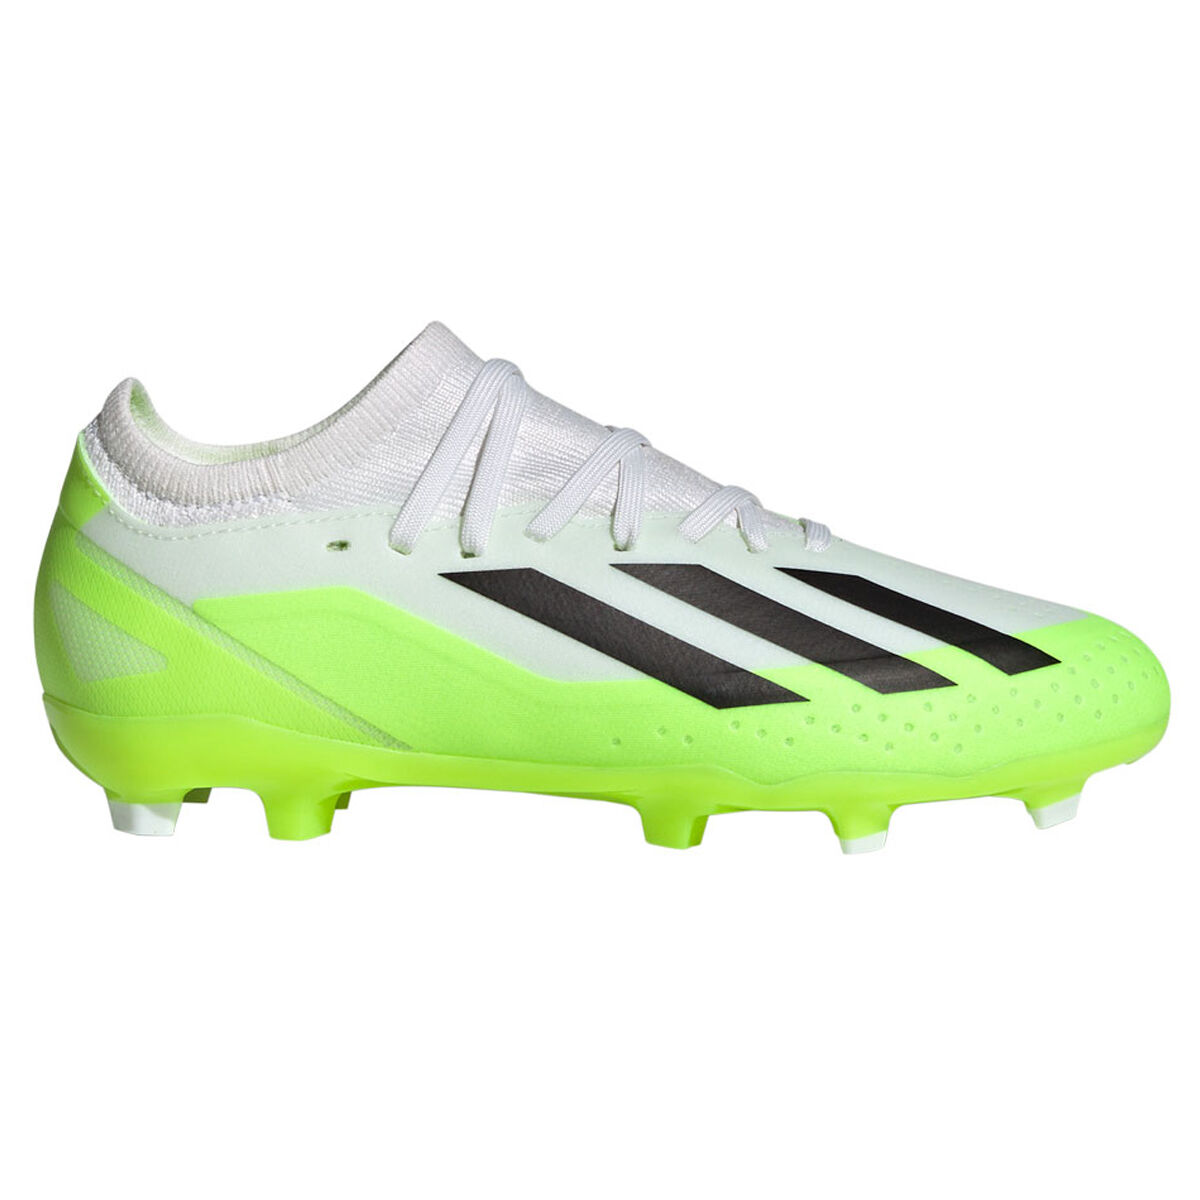 Kids Football Boots & Shoes, Kids Soccer Shoes